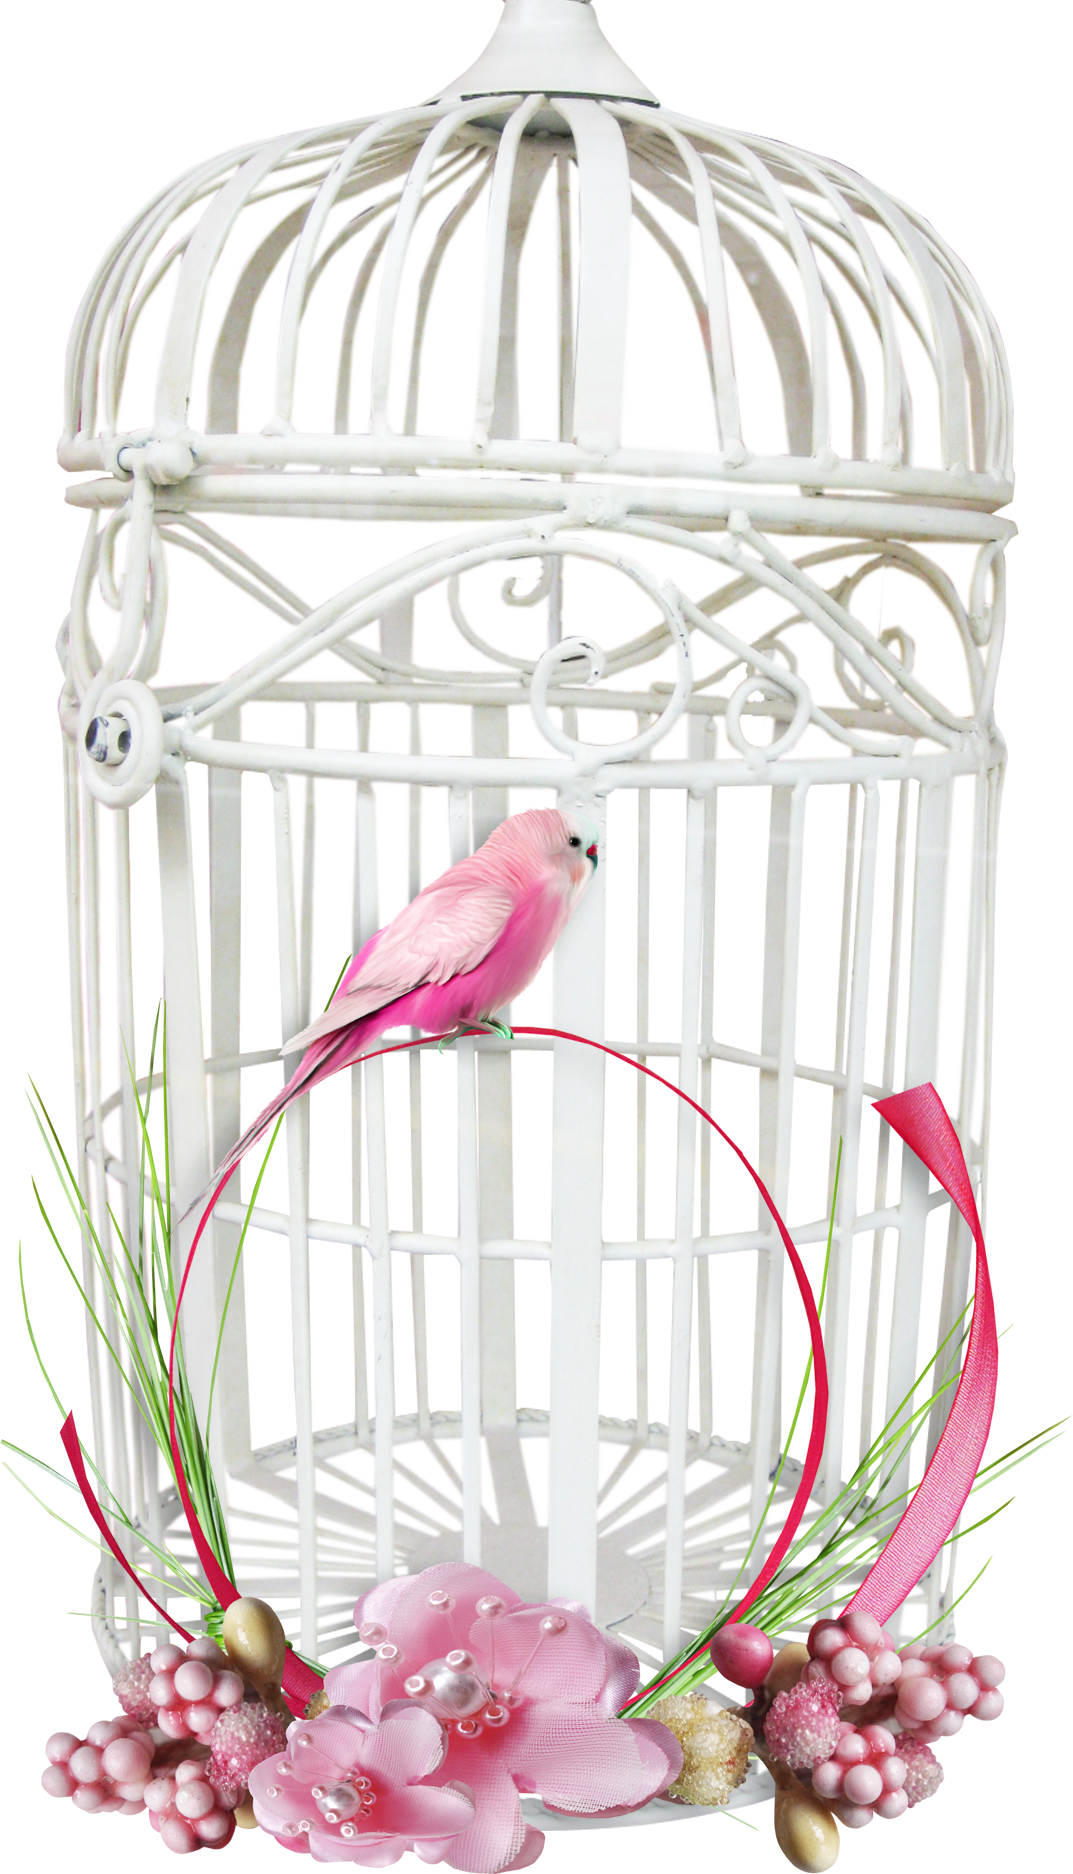 A Bird Sitting On A Cage